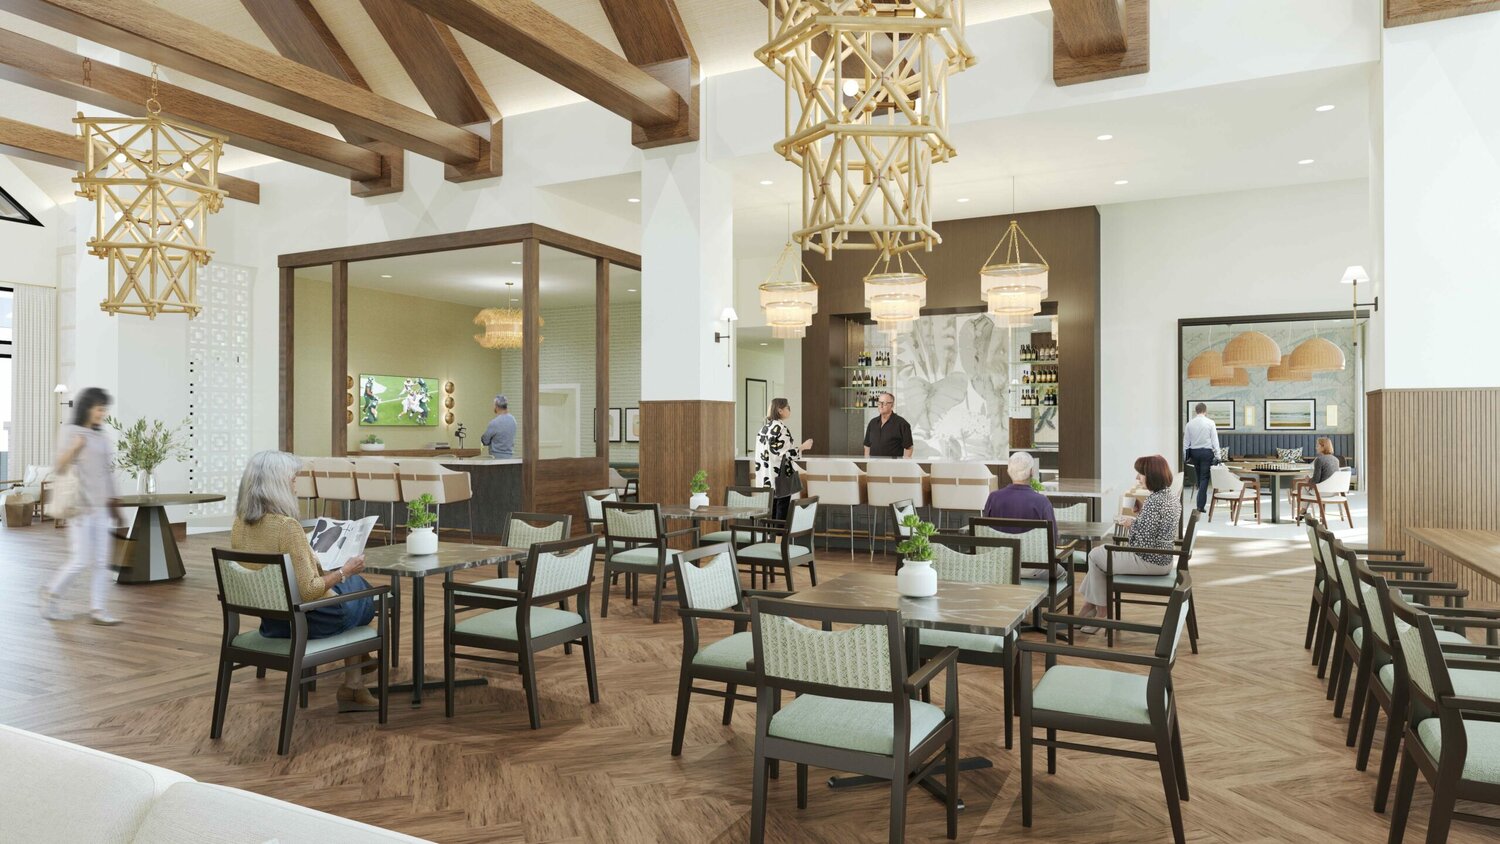 Here’s a look at the forthcoming great room and bar at the Rise clubhouse.